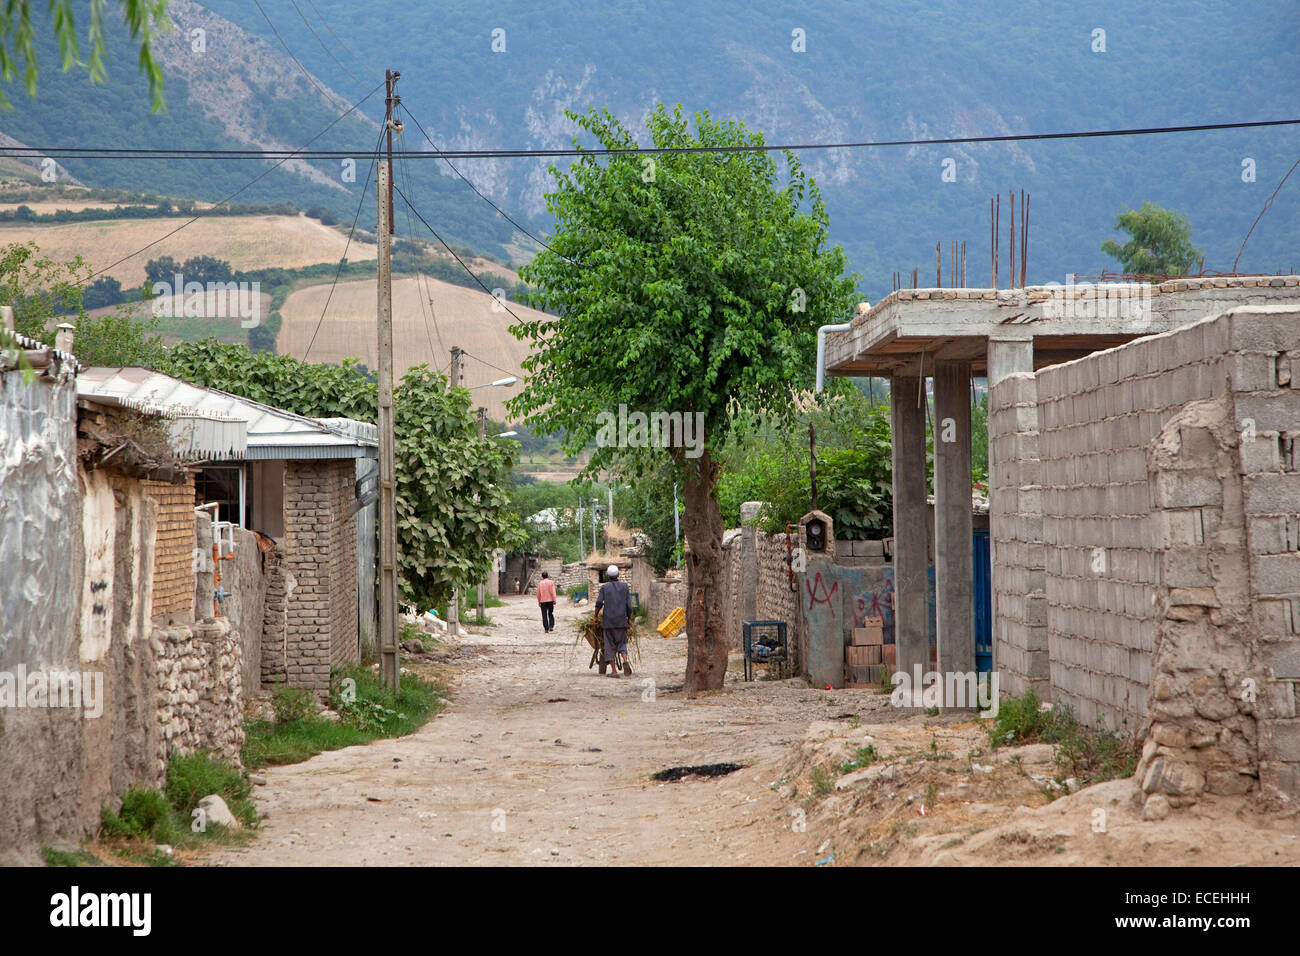 Houses along alley in a small village in rural Iran Stock Photo